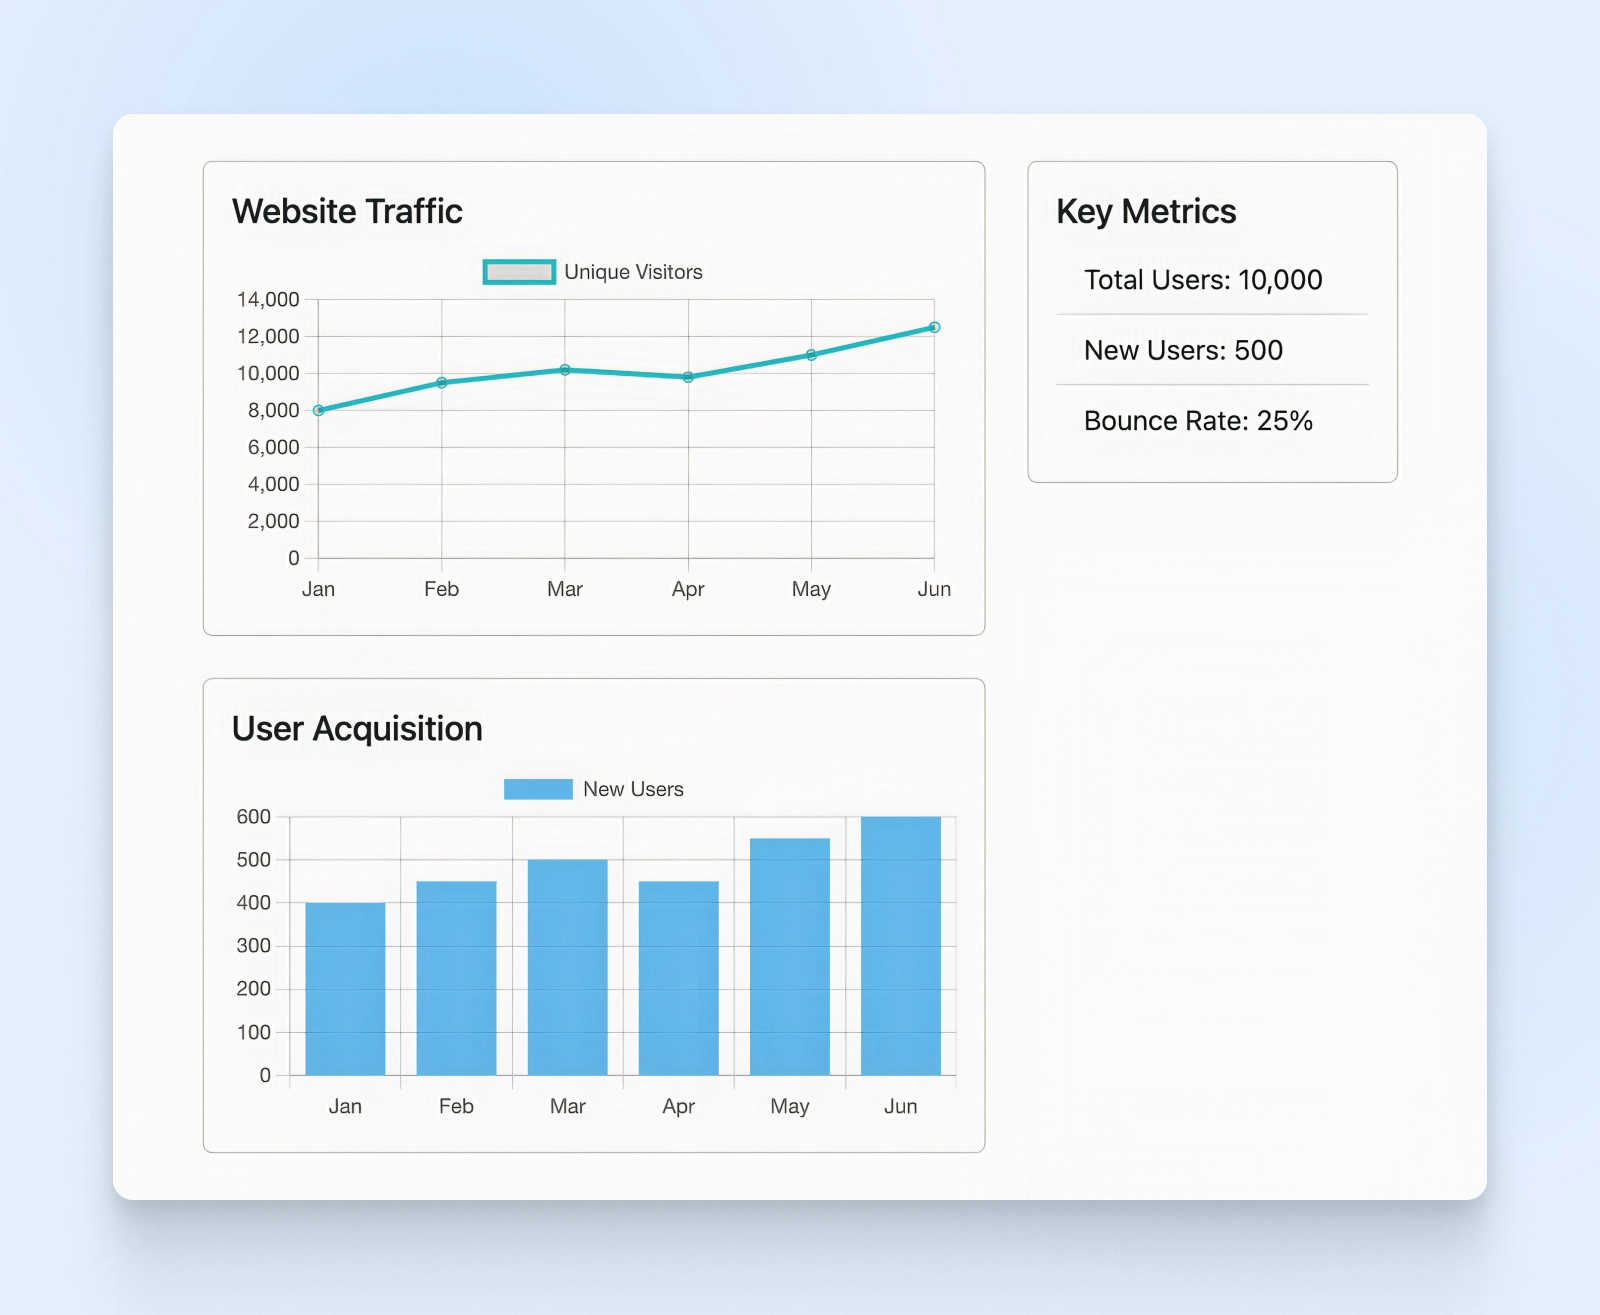 Dashboard with a line chart for Website Traffic, a bar chart for User Acquisition, and Key Metrics